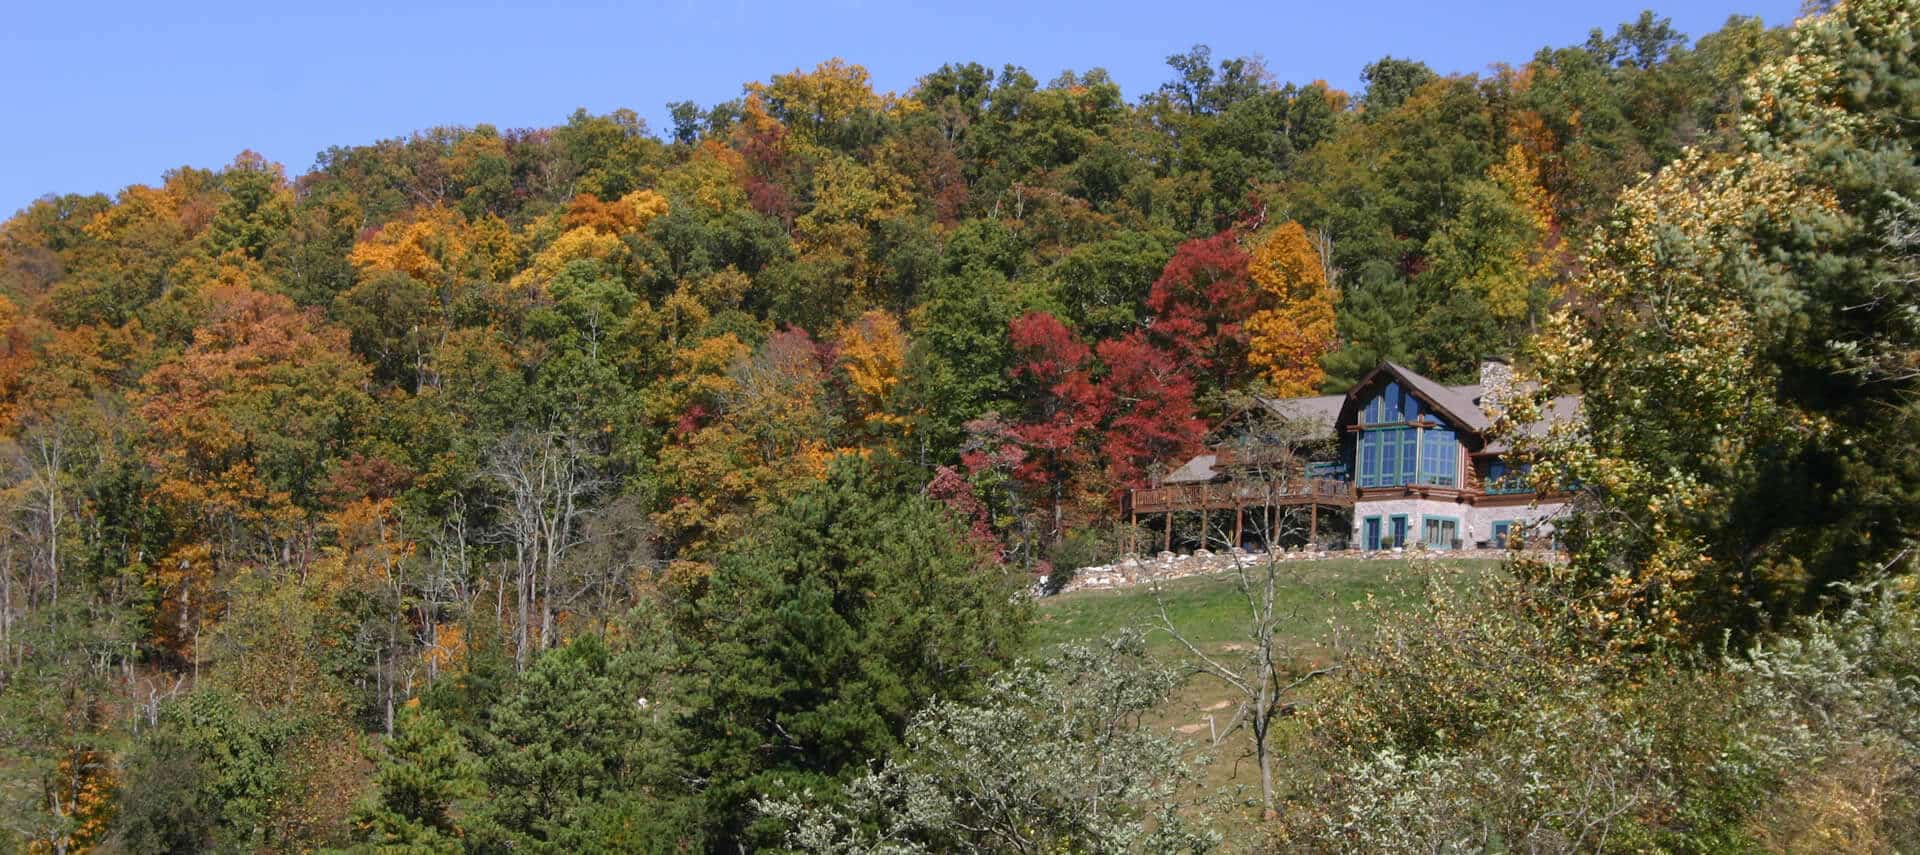 Large log-cabin style home with wooden deck nestled among hills covered in fall foliage.